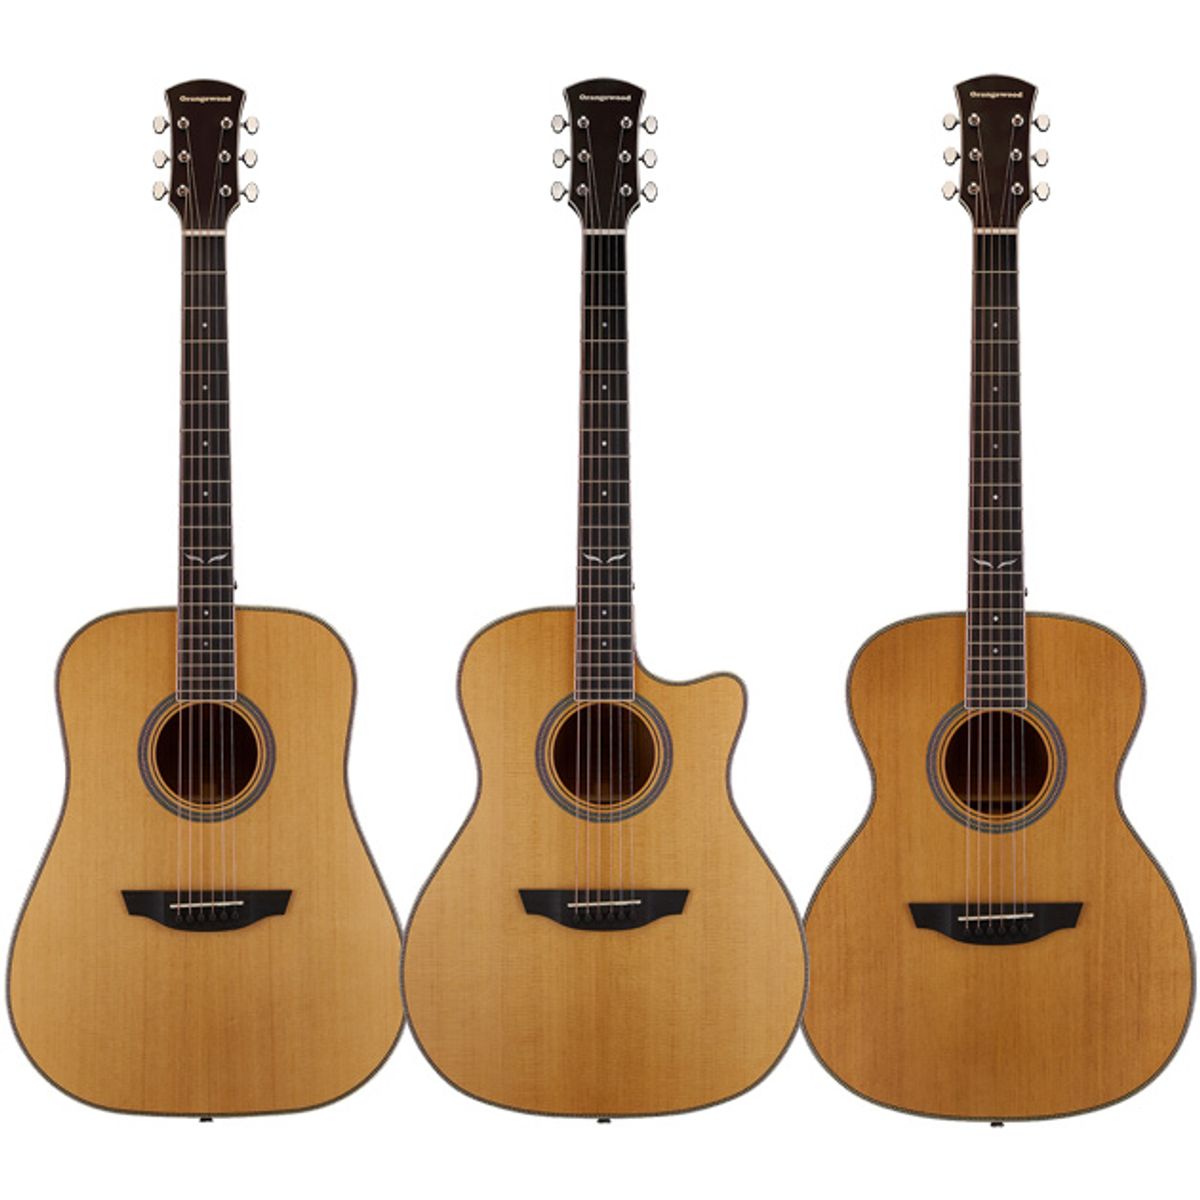 Orangewood Introduces First All-Solid Acoustic Guitars